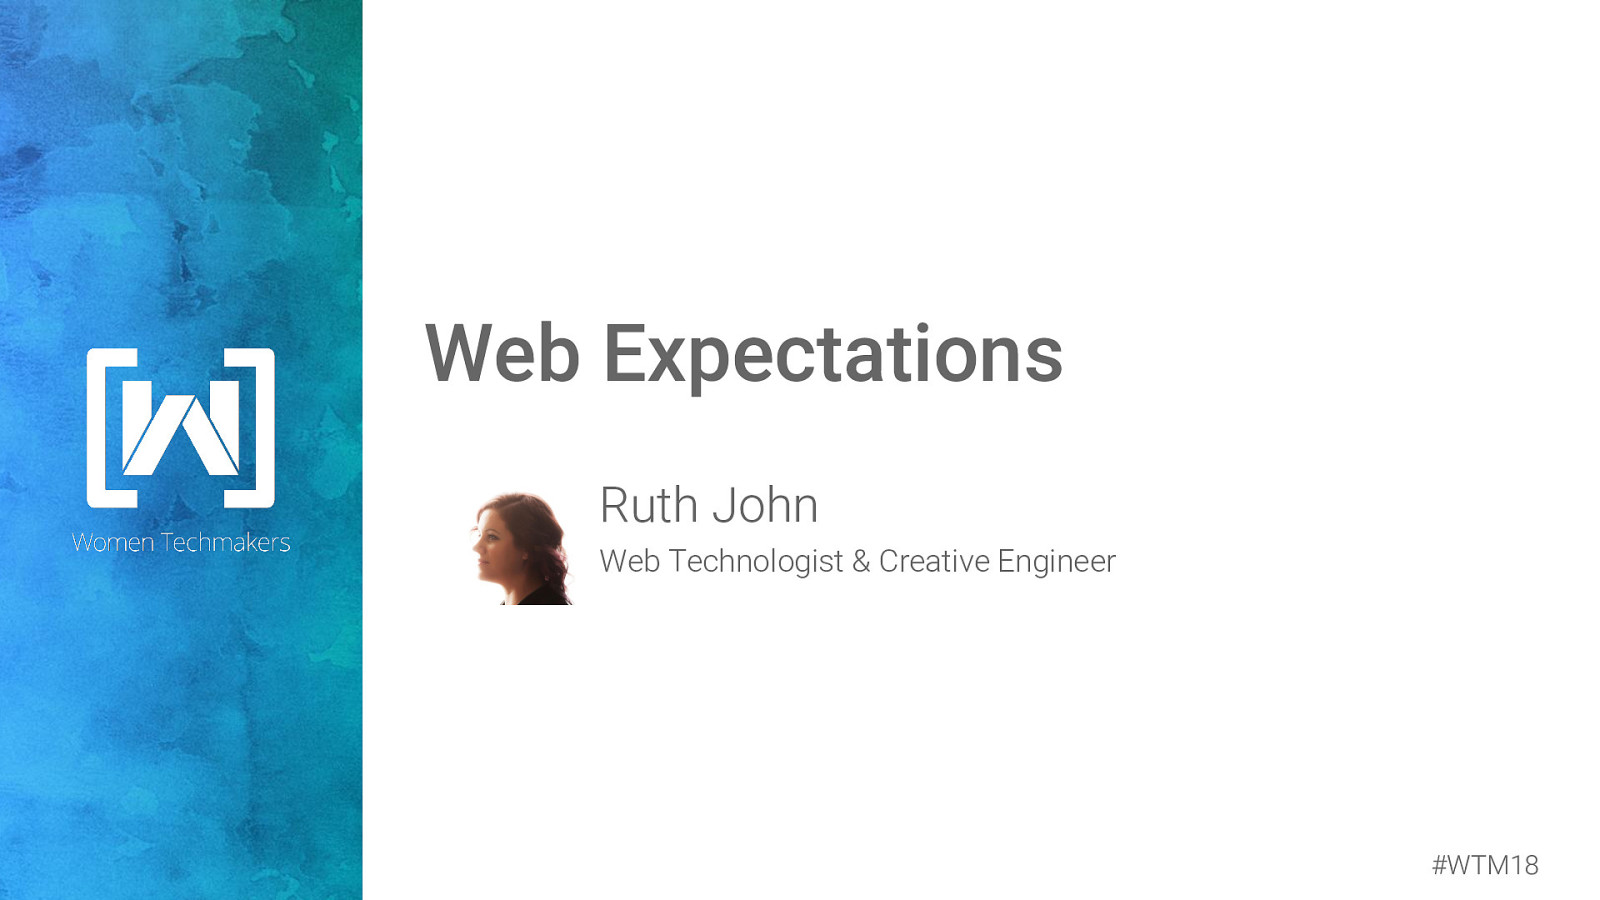 Web Expectations